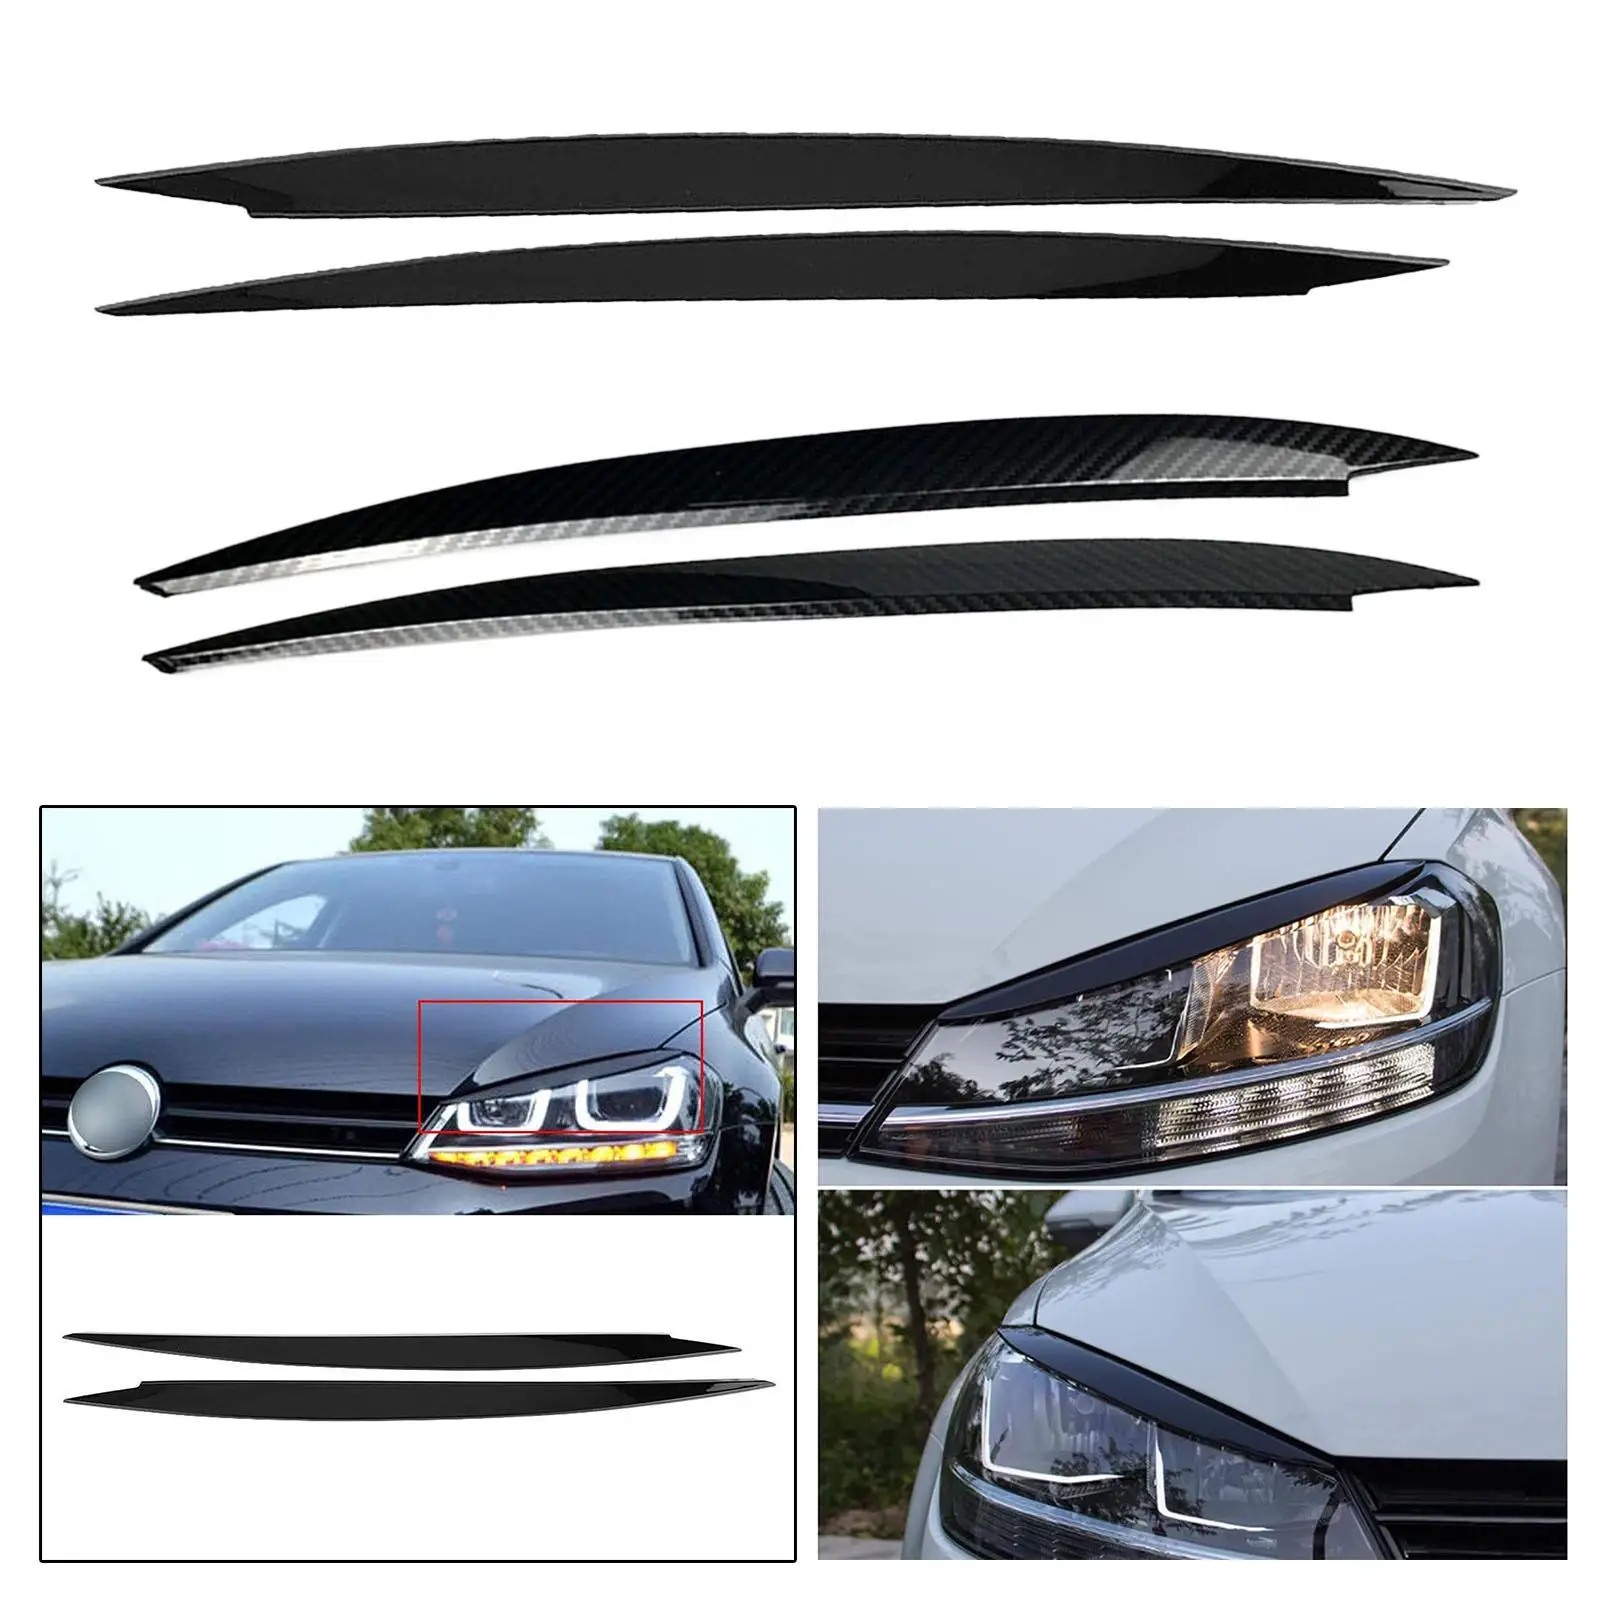 2x Headlights Eyelid Eyebrows Trims Cover Spare Parts Length 43.3cm Replacement Waterproof Easy to Install for VW Golf 7